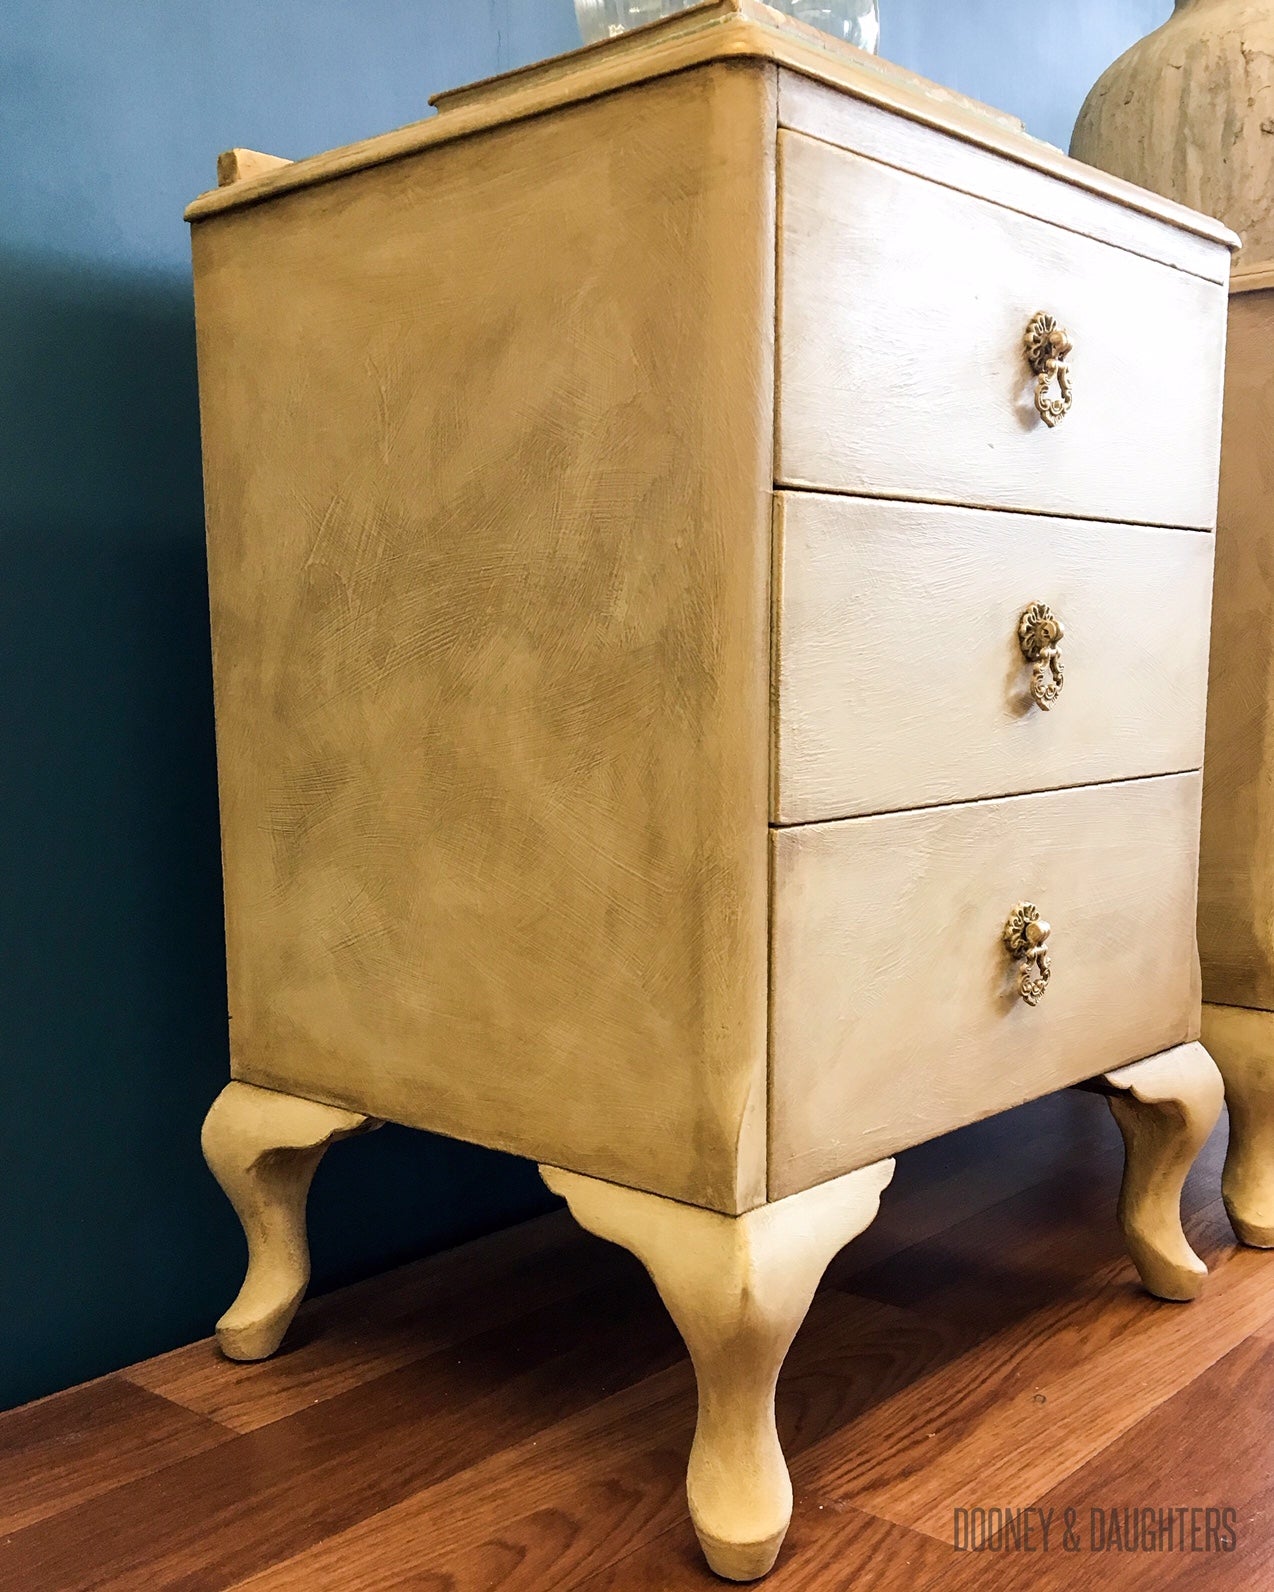 French Rustic Bedside Tables